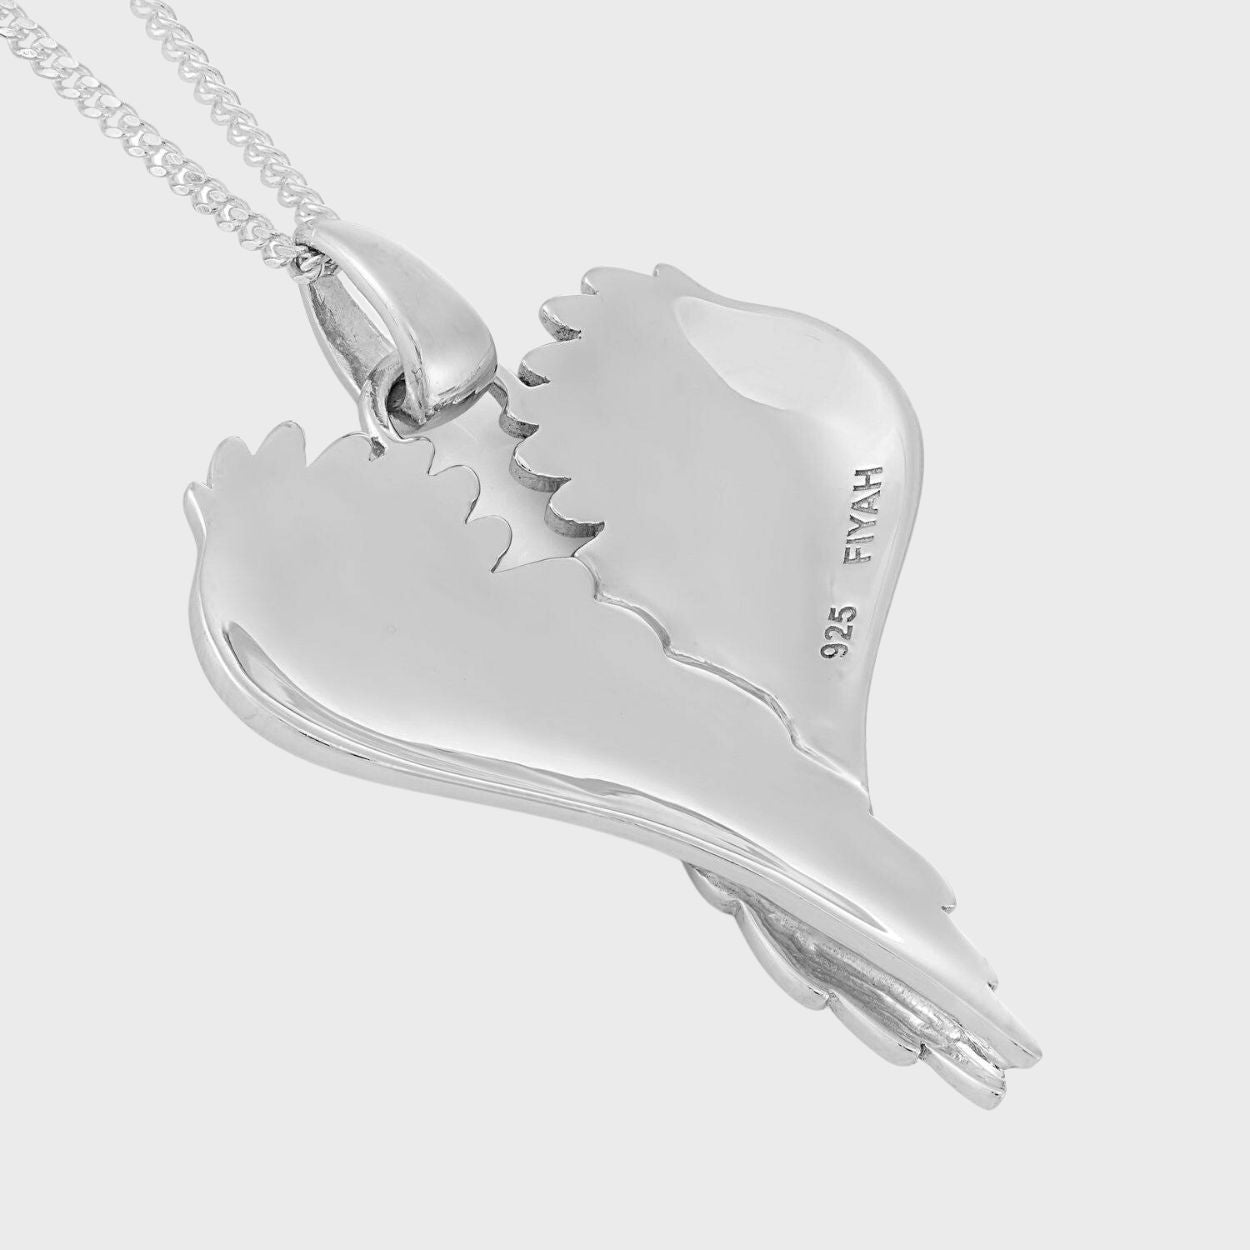 Dainty Angel Wing Heart Necklace